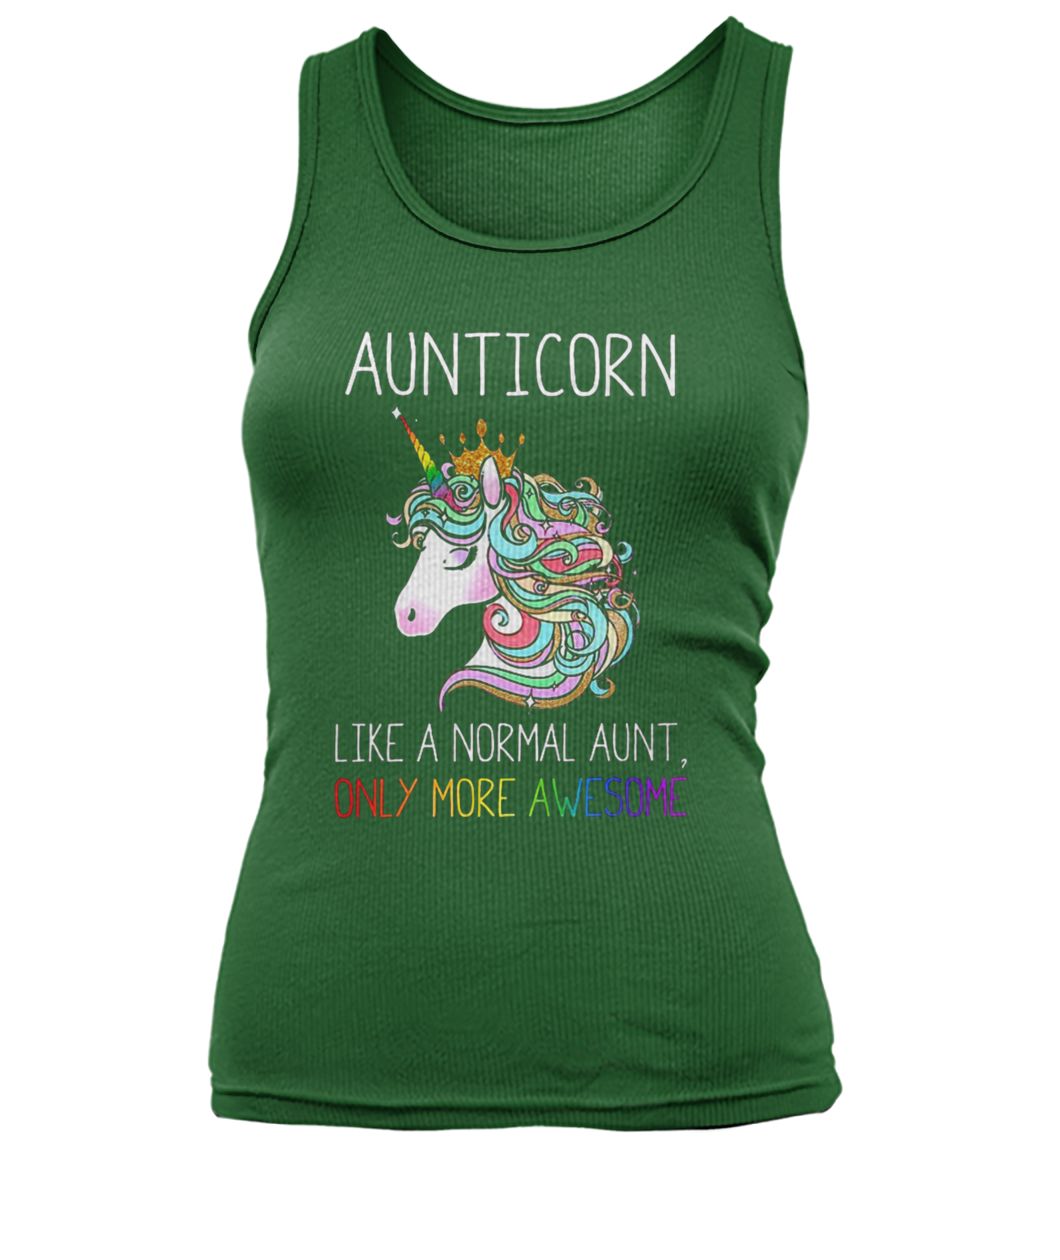 Aunticorn like a normal aunt only more awesome women's tank top